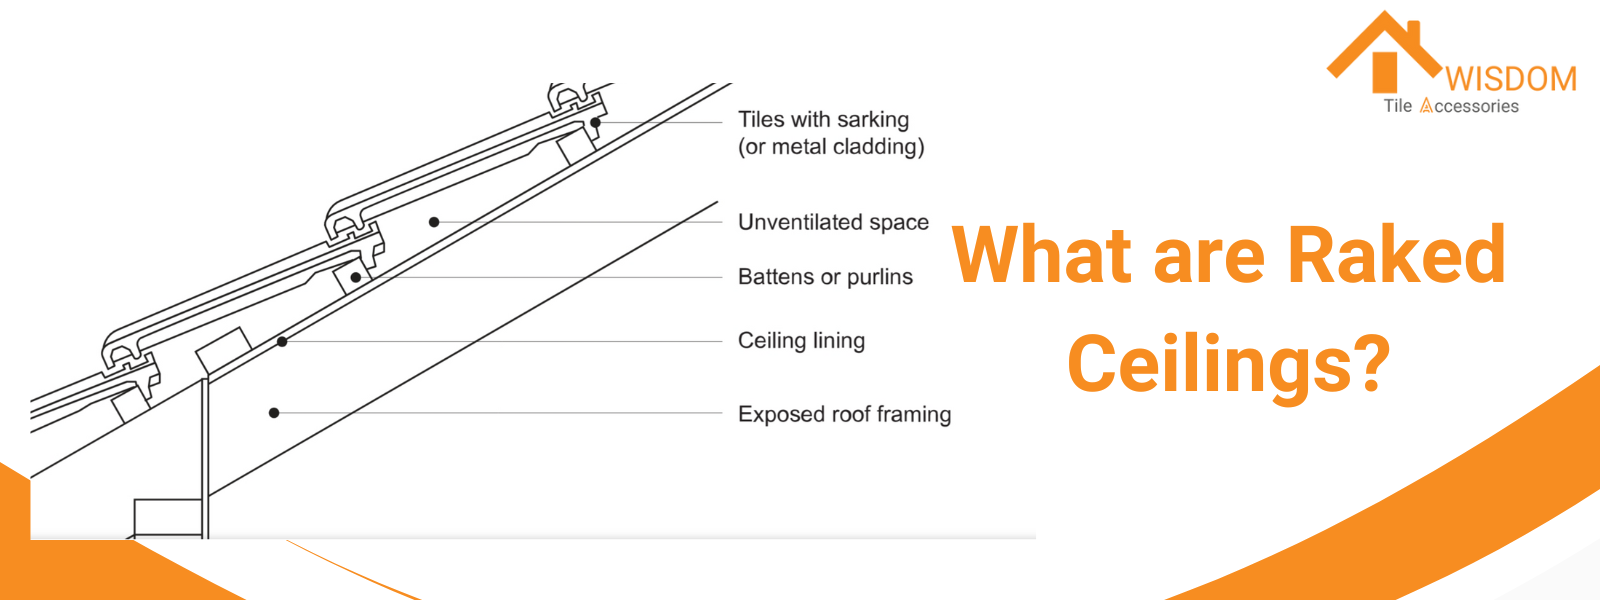 What are Raked Ceilings?